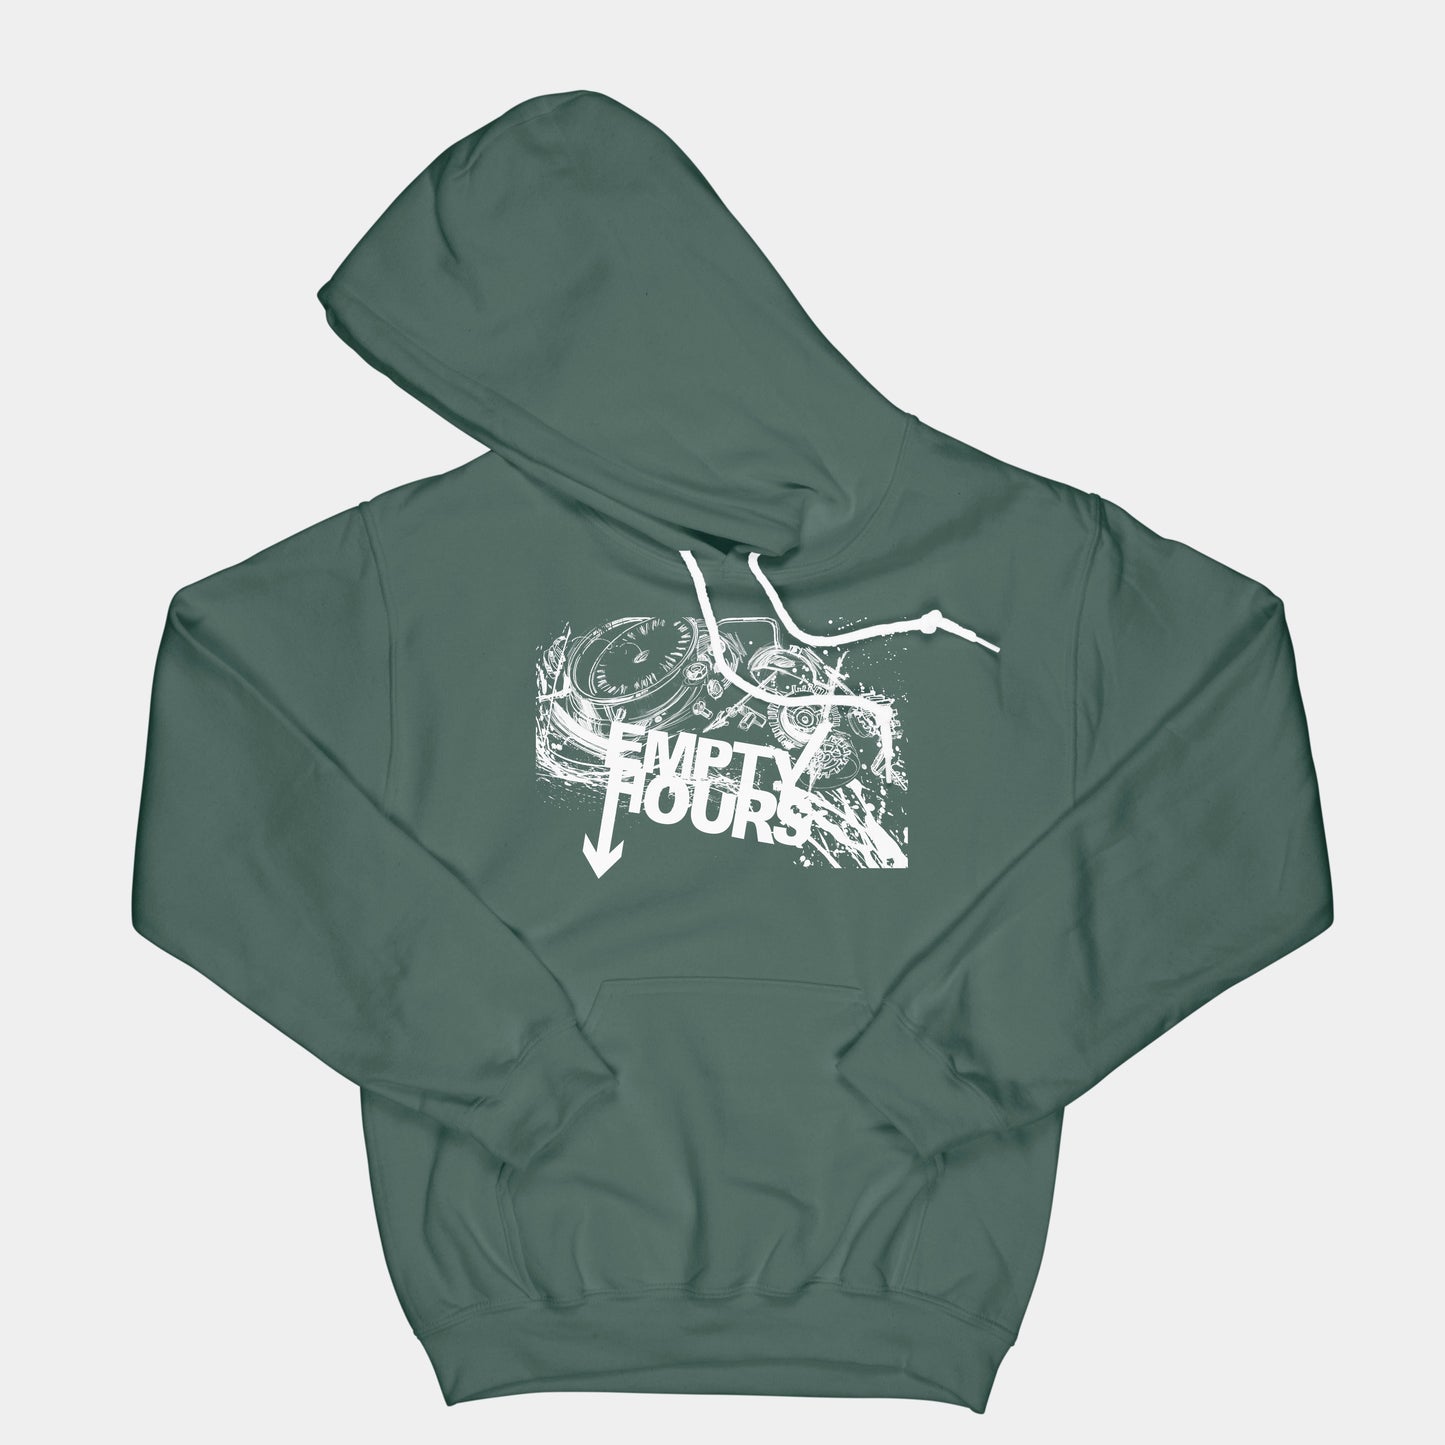 Band Logo, Brantford, Empty Hours, Fat Dave, Hoodie, Musician, Forest Green/White